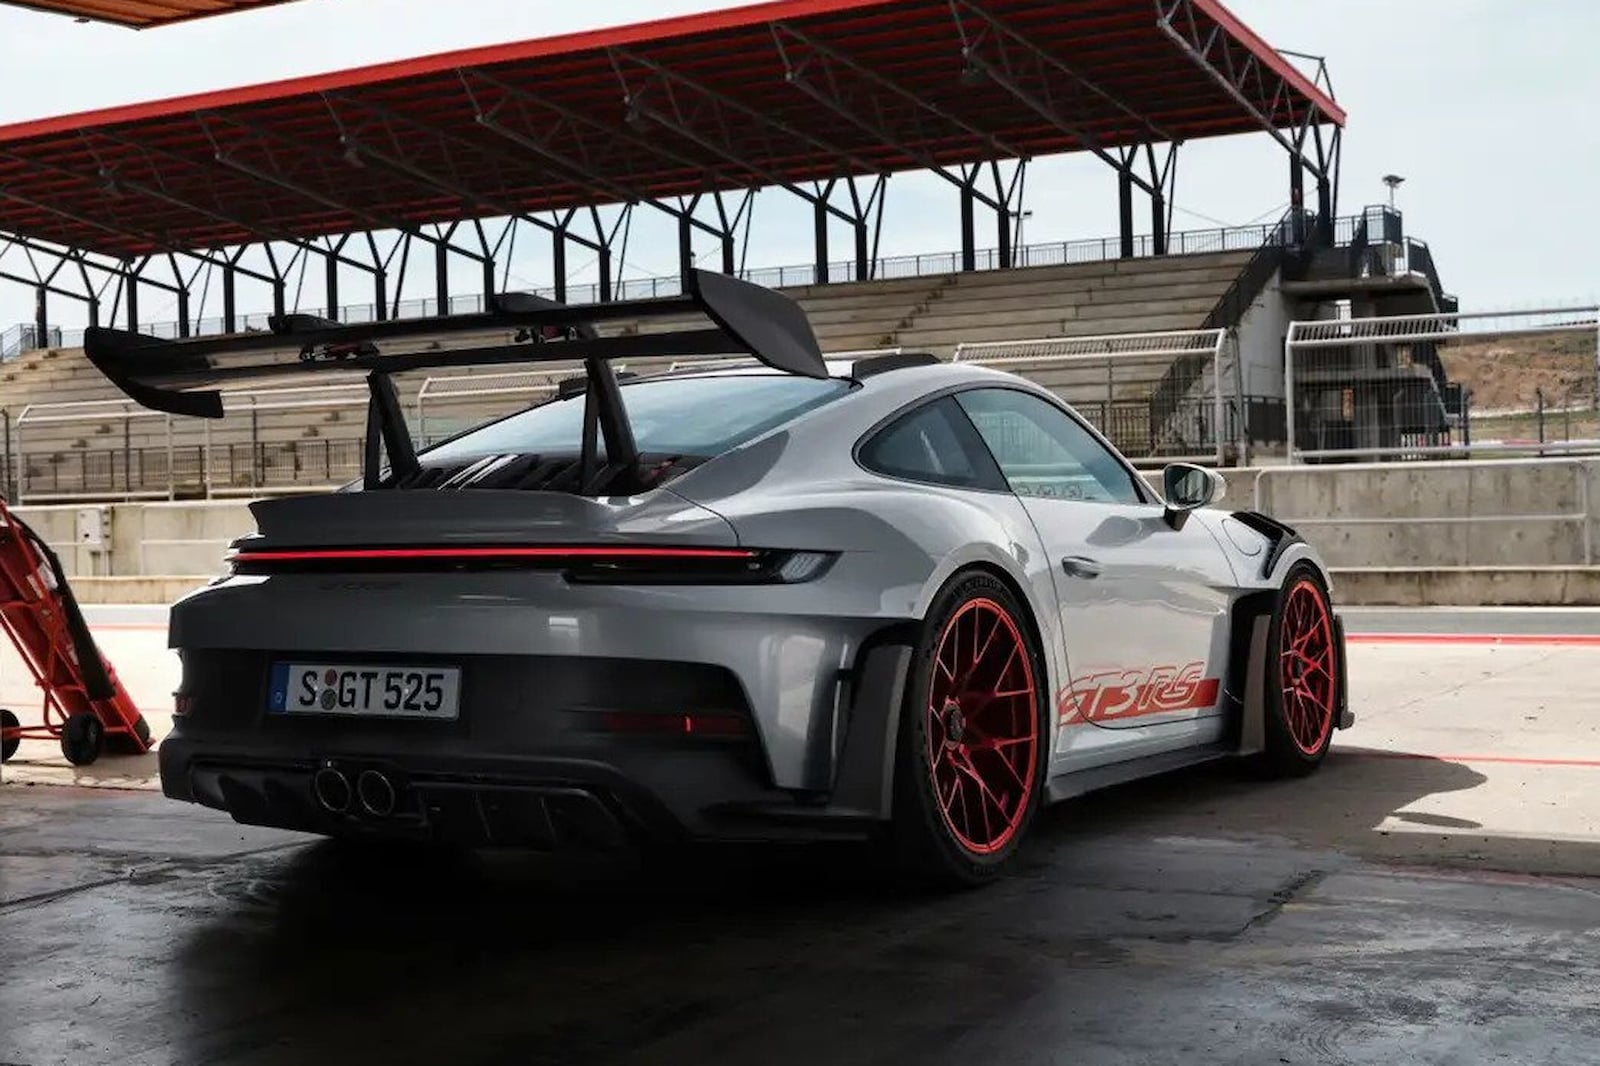 Rear-angled view of a Porsche 911 GT3 RS